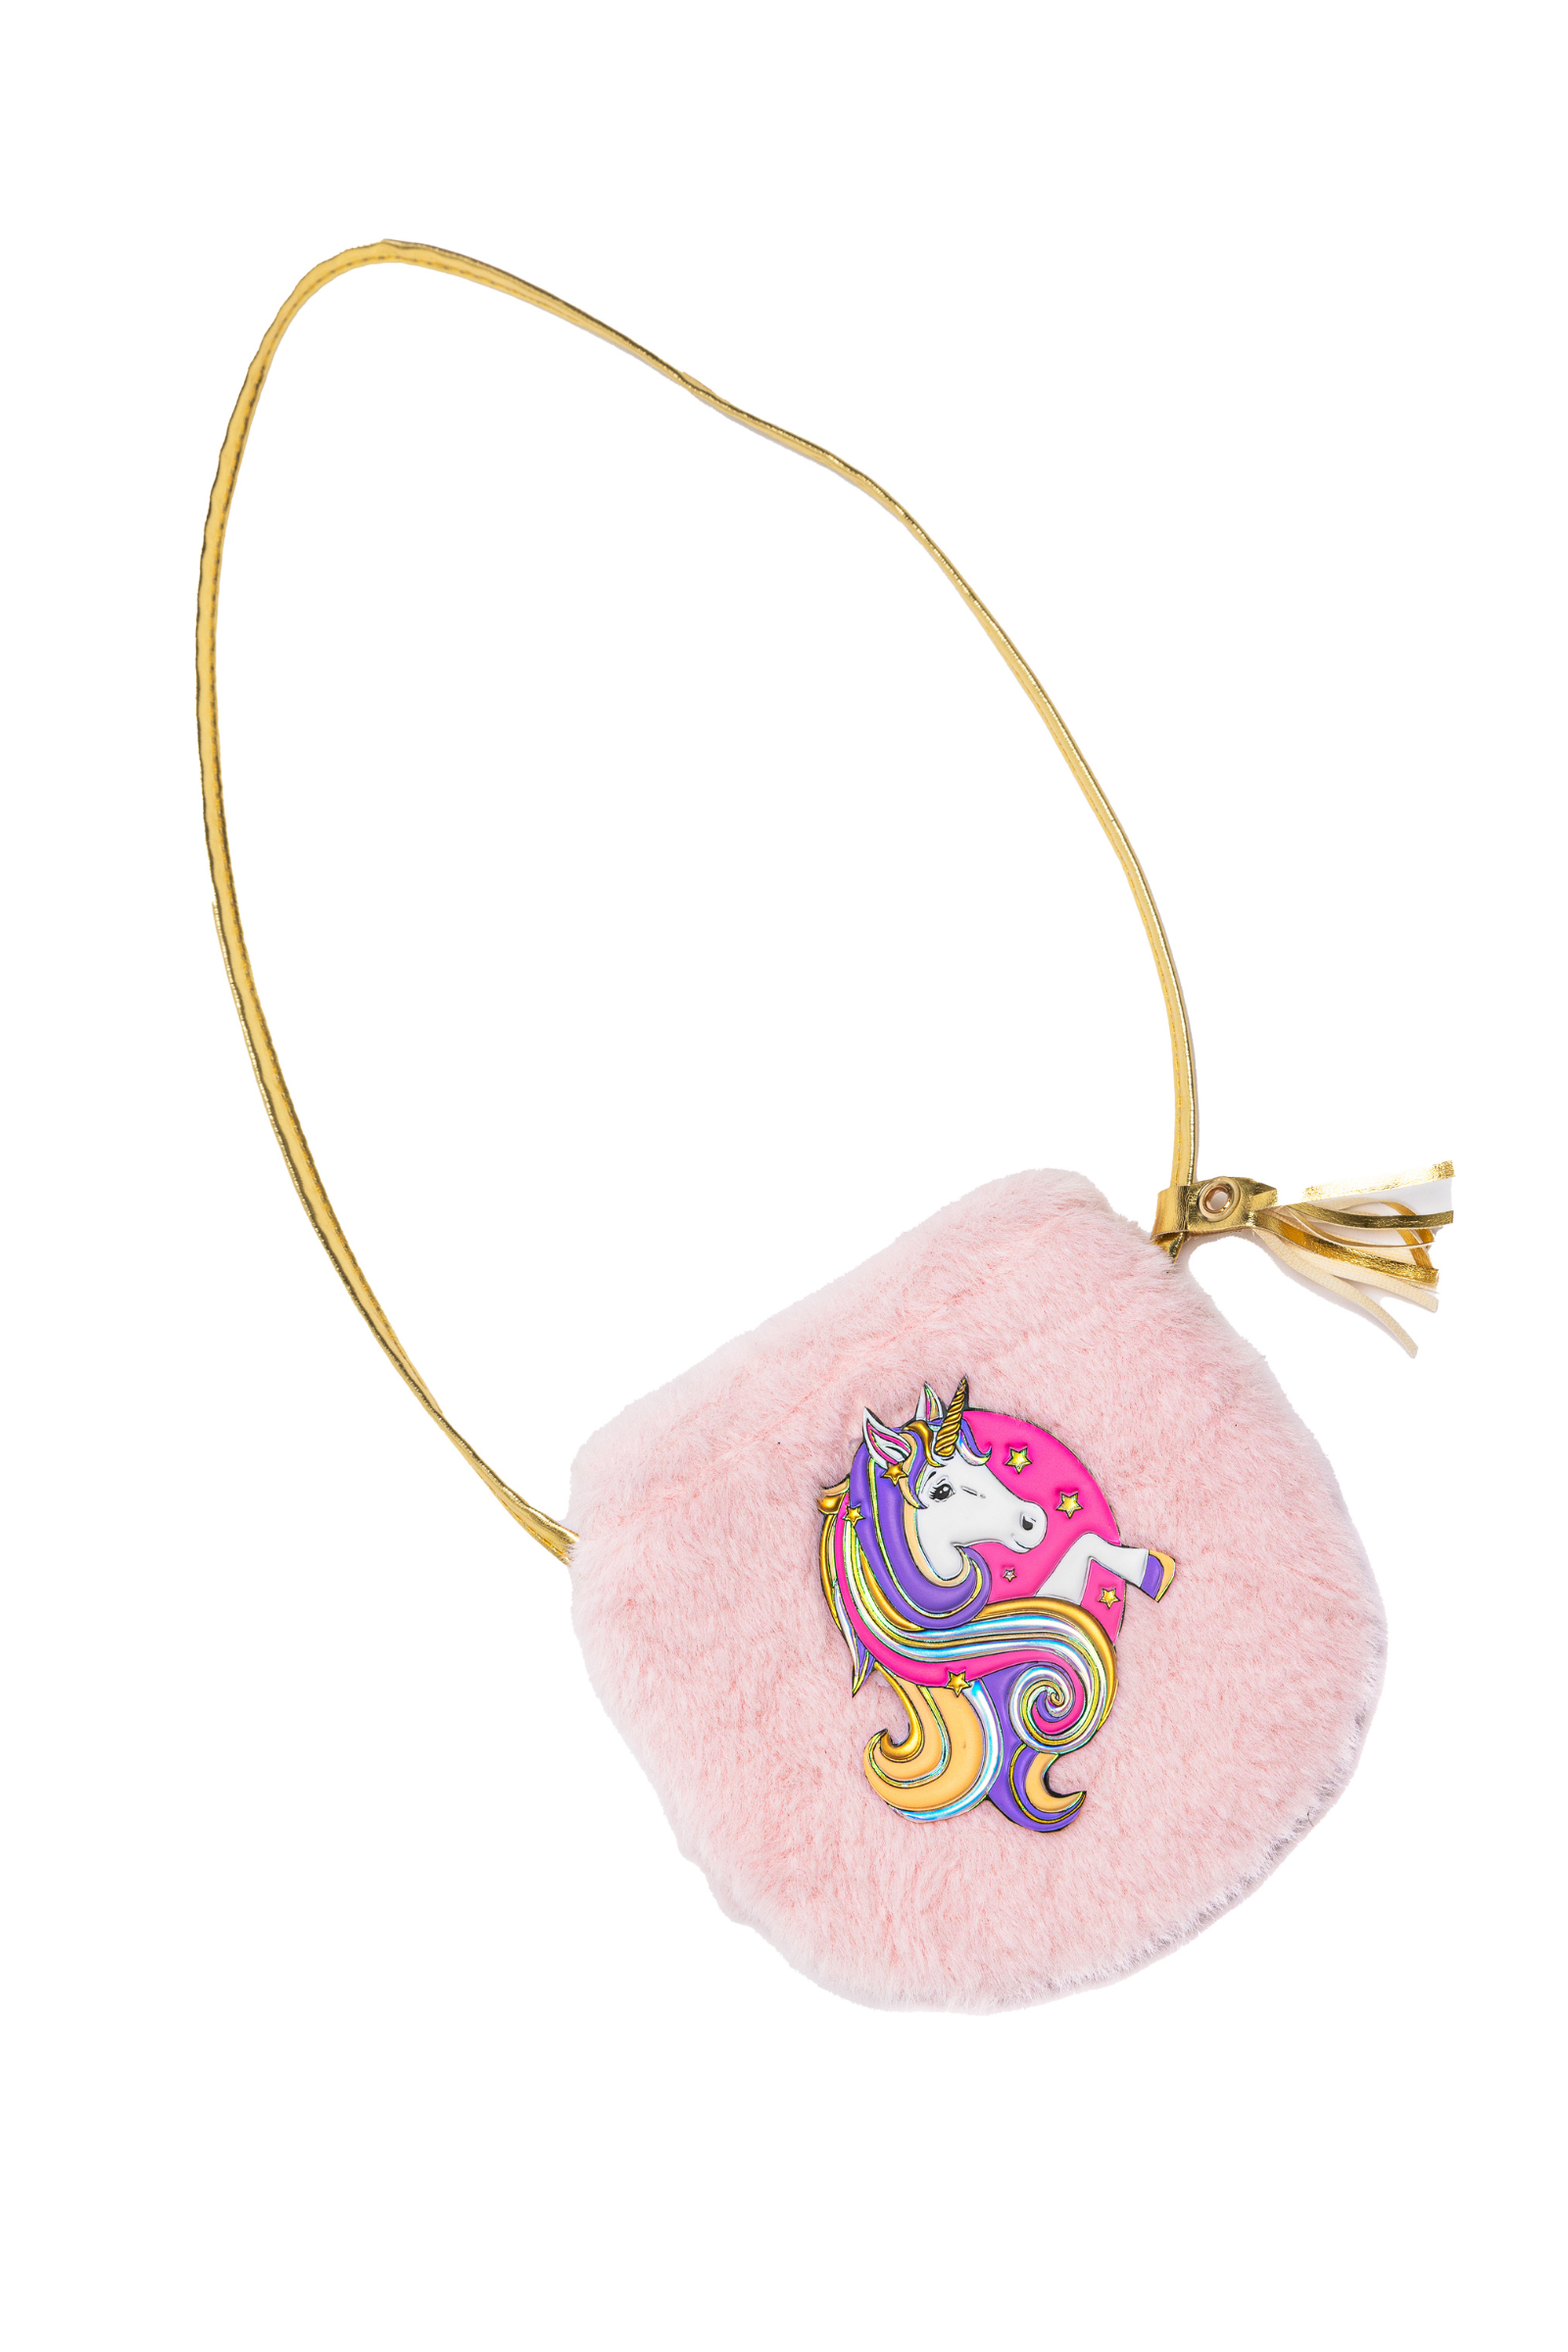 SAFESEED Unicorn Glitter Sling Bag Clutch Purse Wallet US122 at Rs 140 |  George Town | Chennai | ID: 25669112630